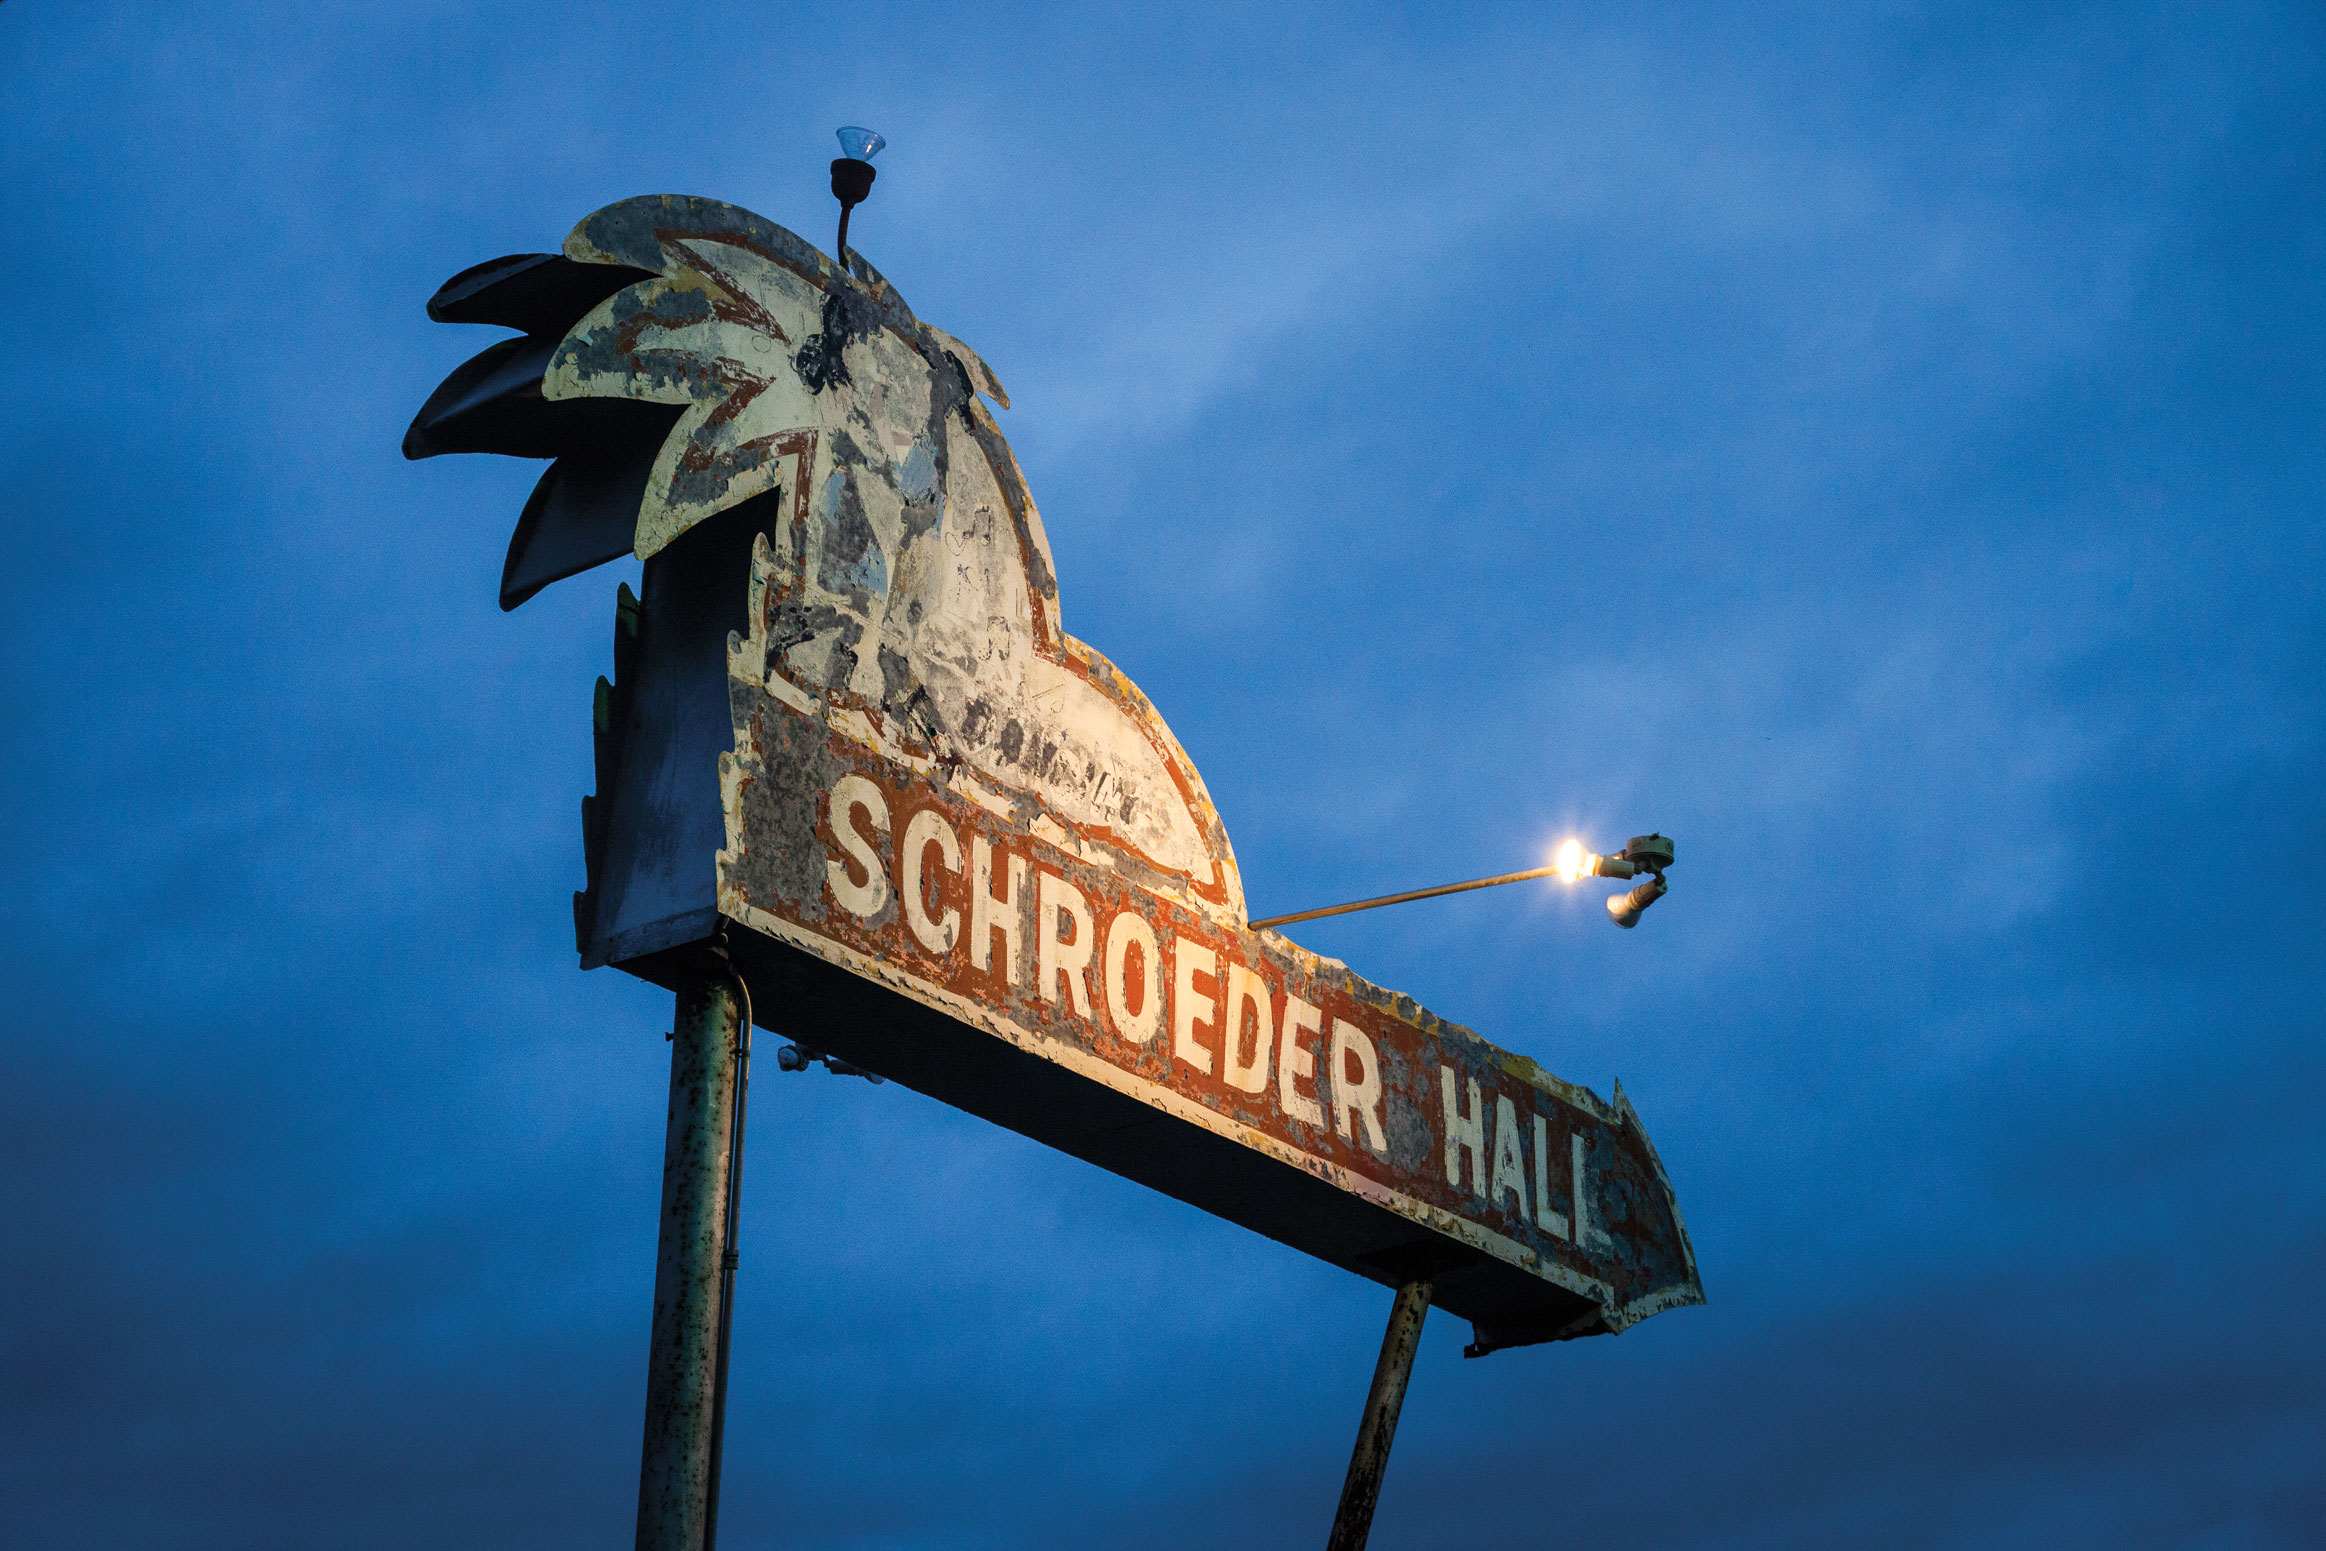 The sign for Schroeder Hall